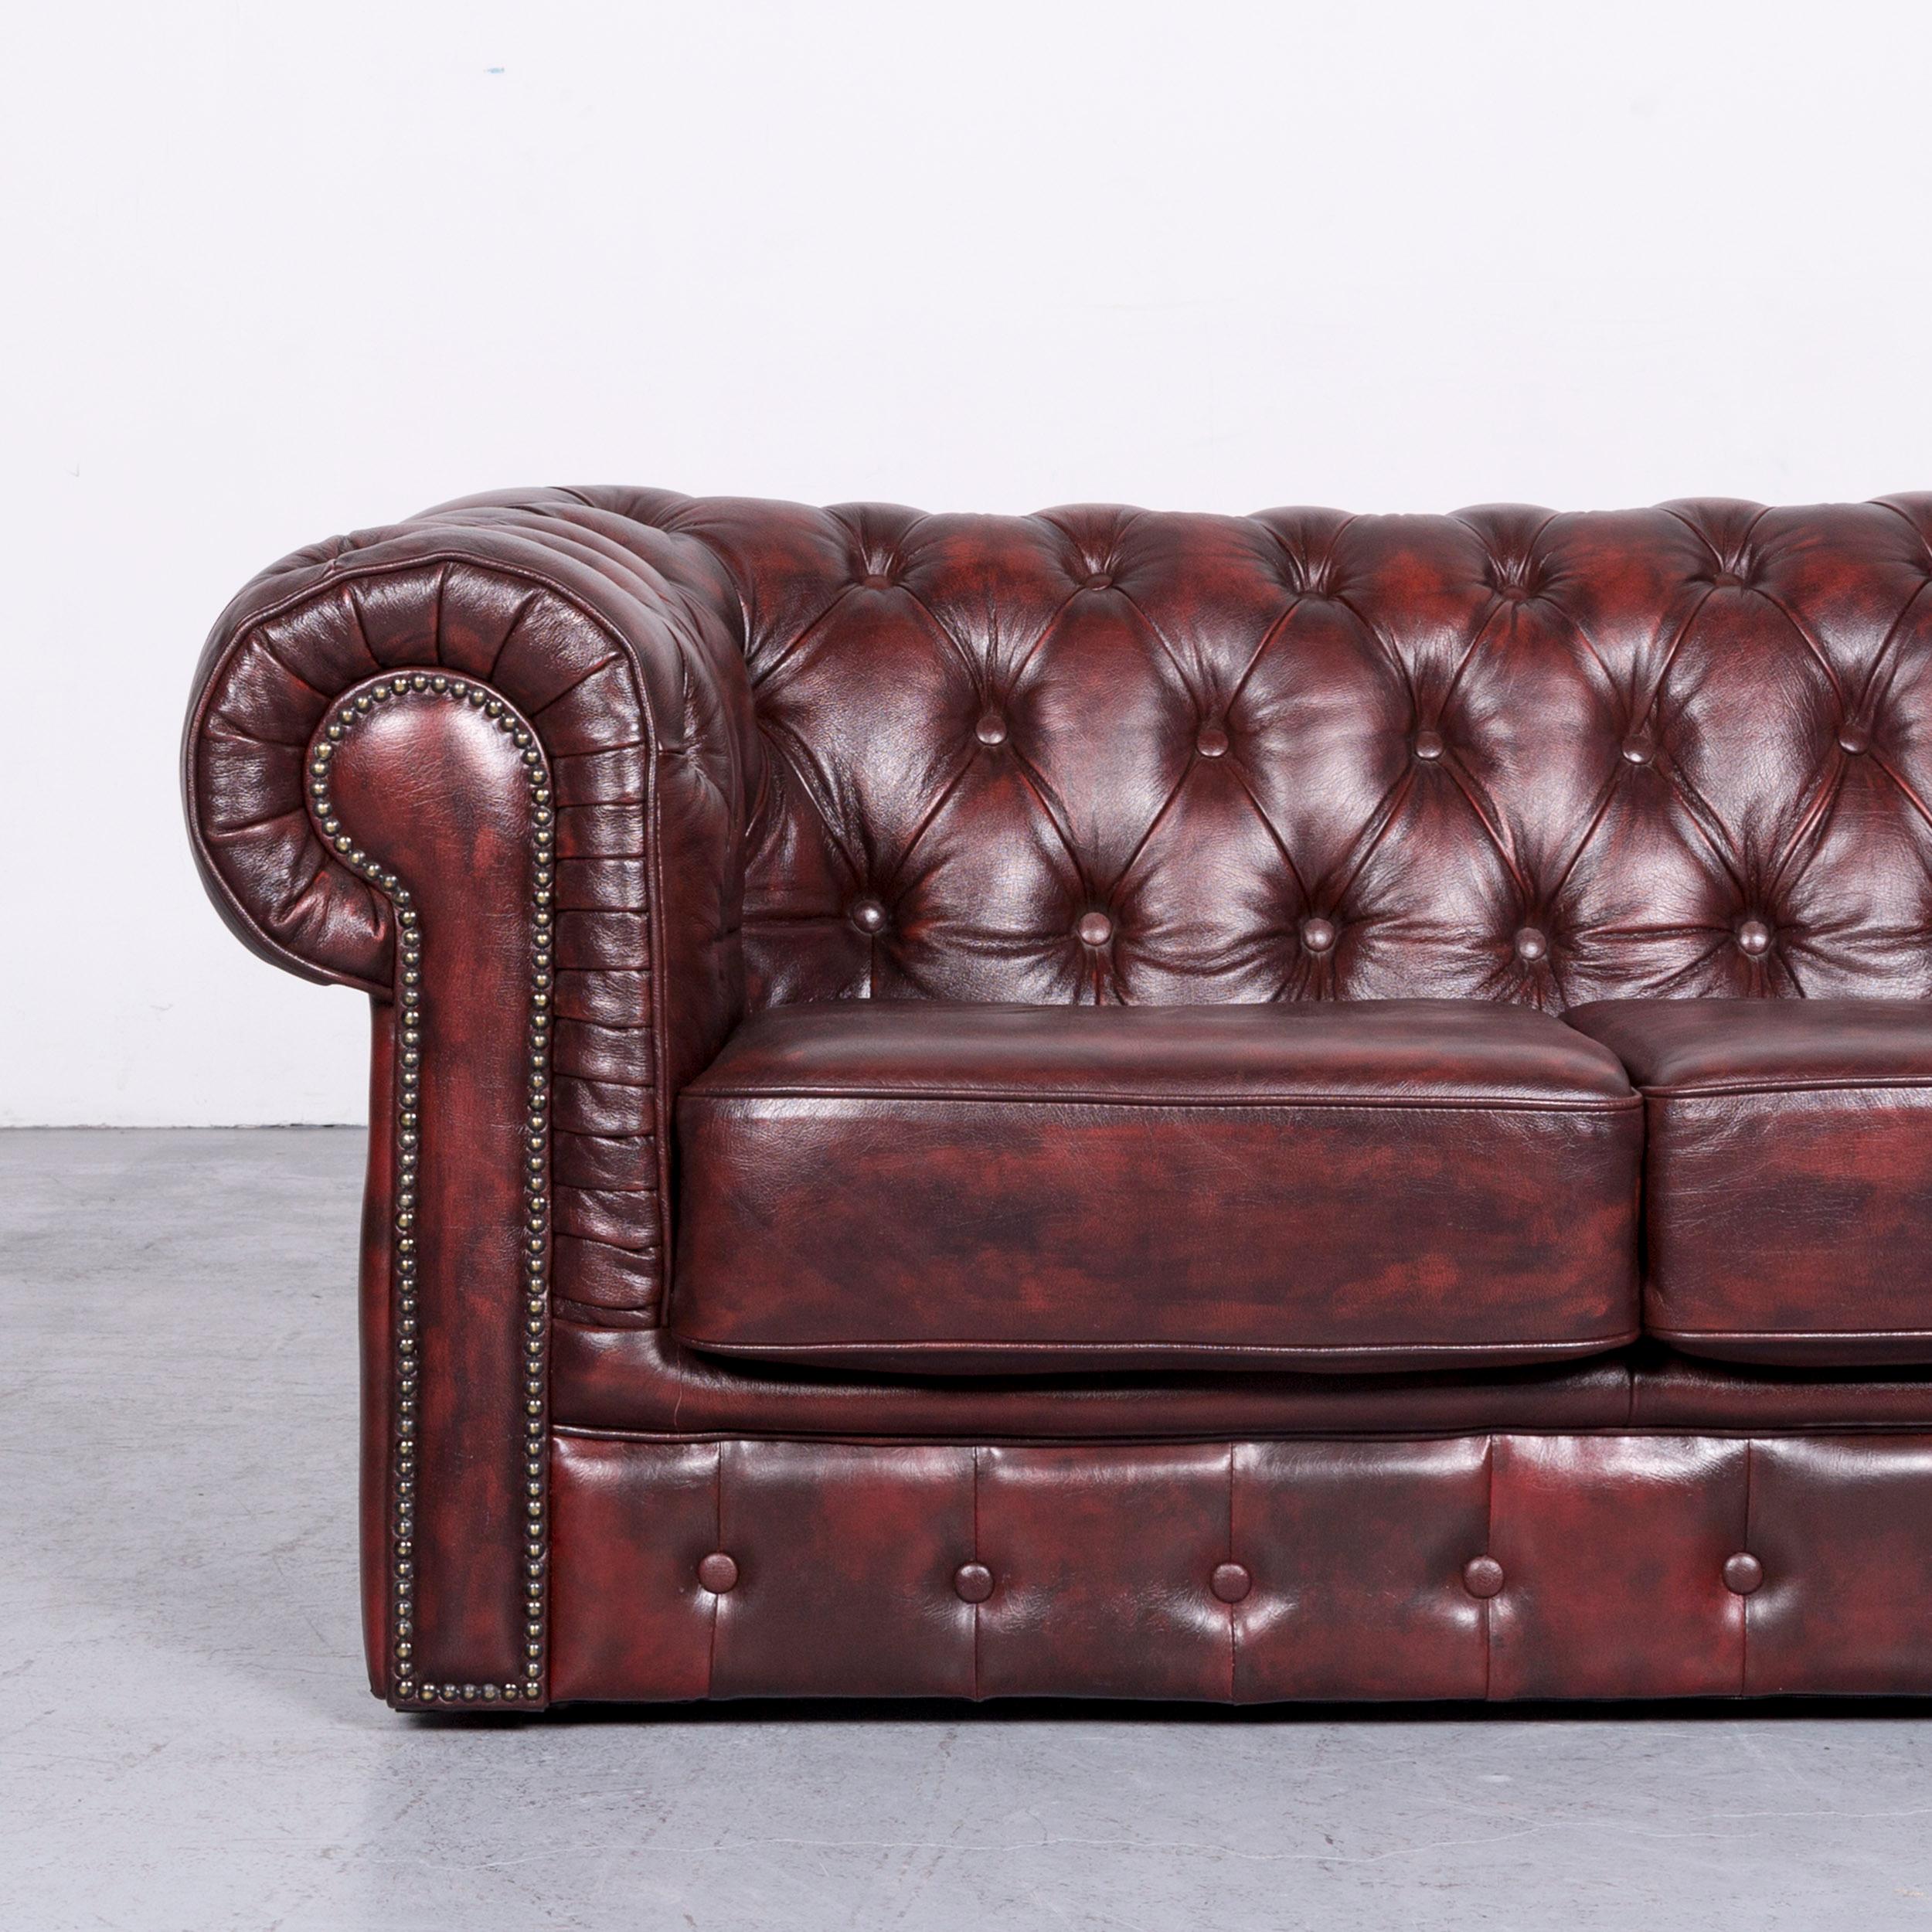 European Chesterfield Style Vintage Leather Sofa Two-Seat Couch Red